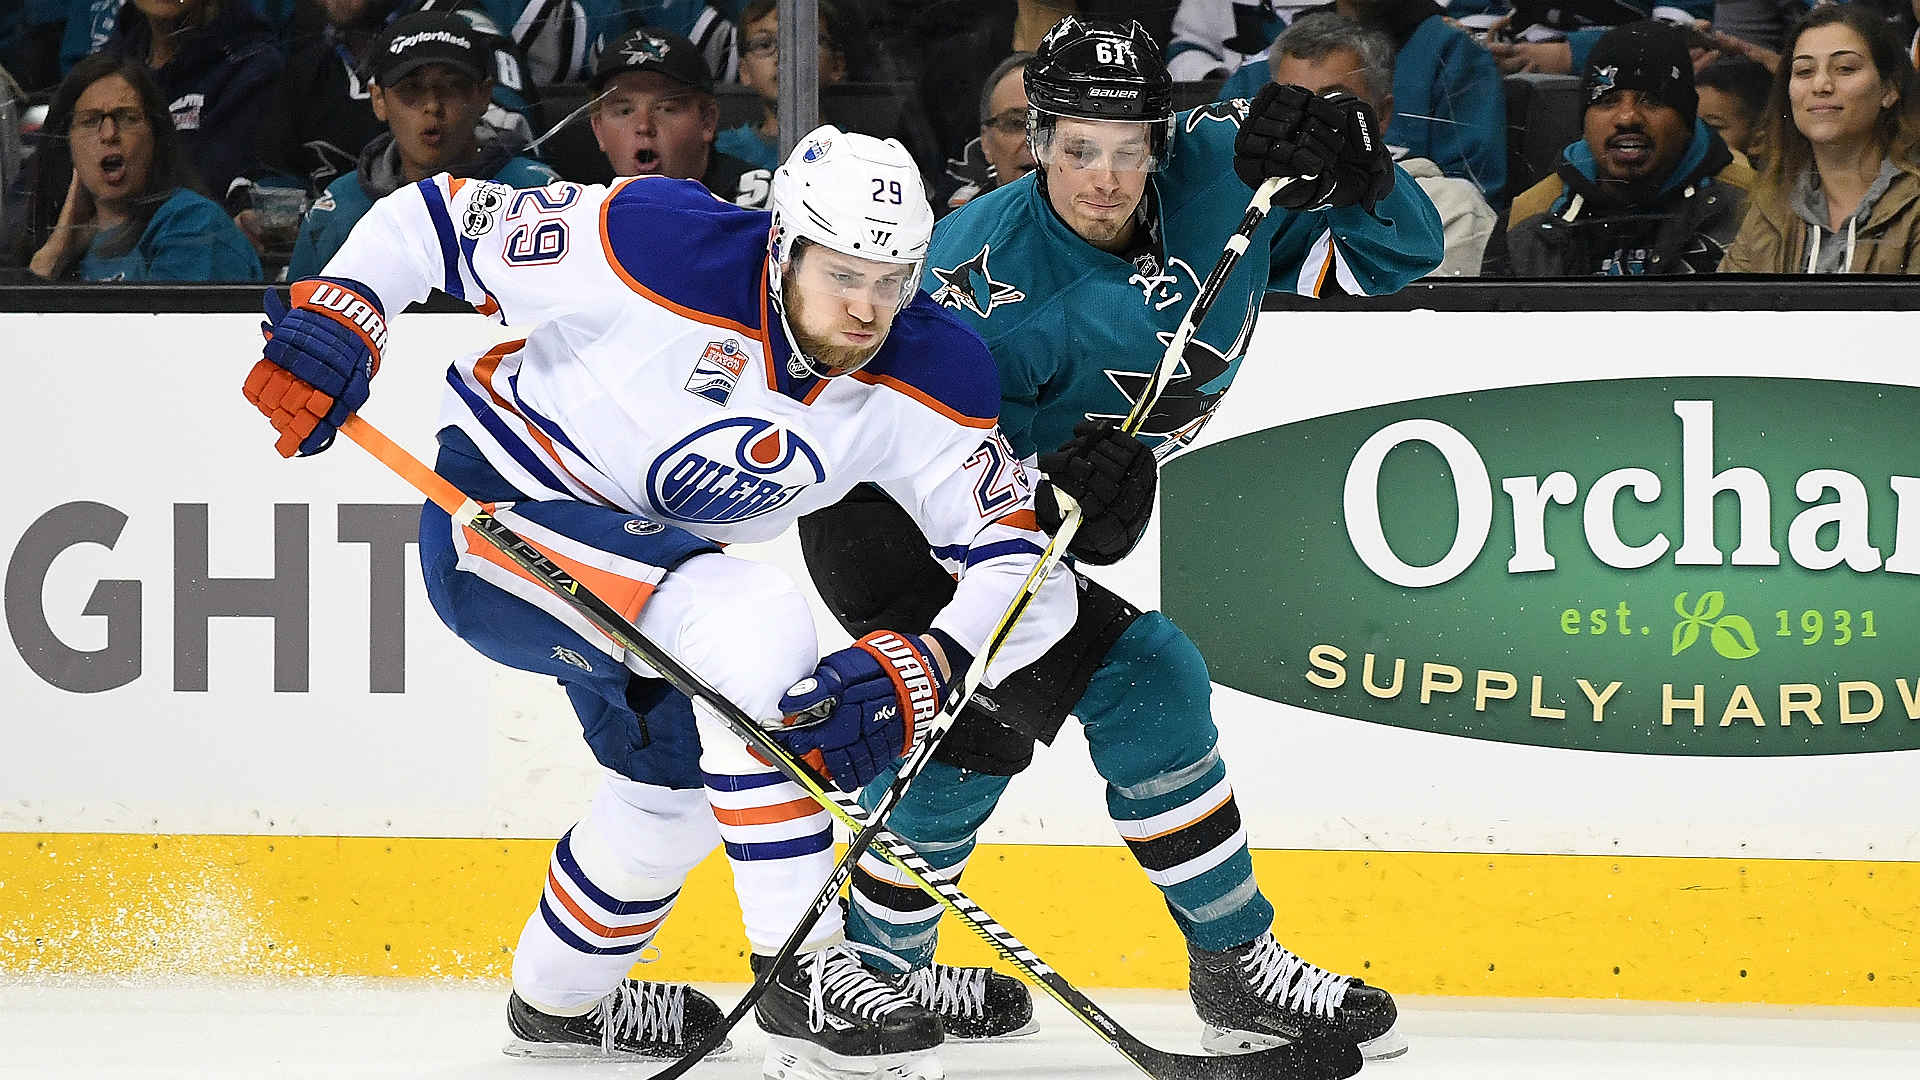 NHL playoffs 2017: Sharks force Oilers to start practice in dark